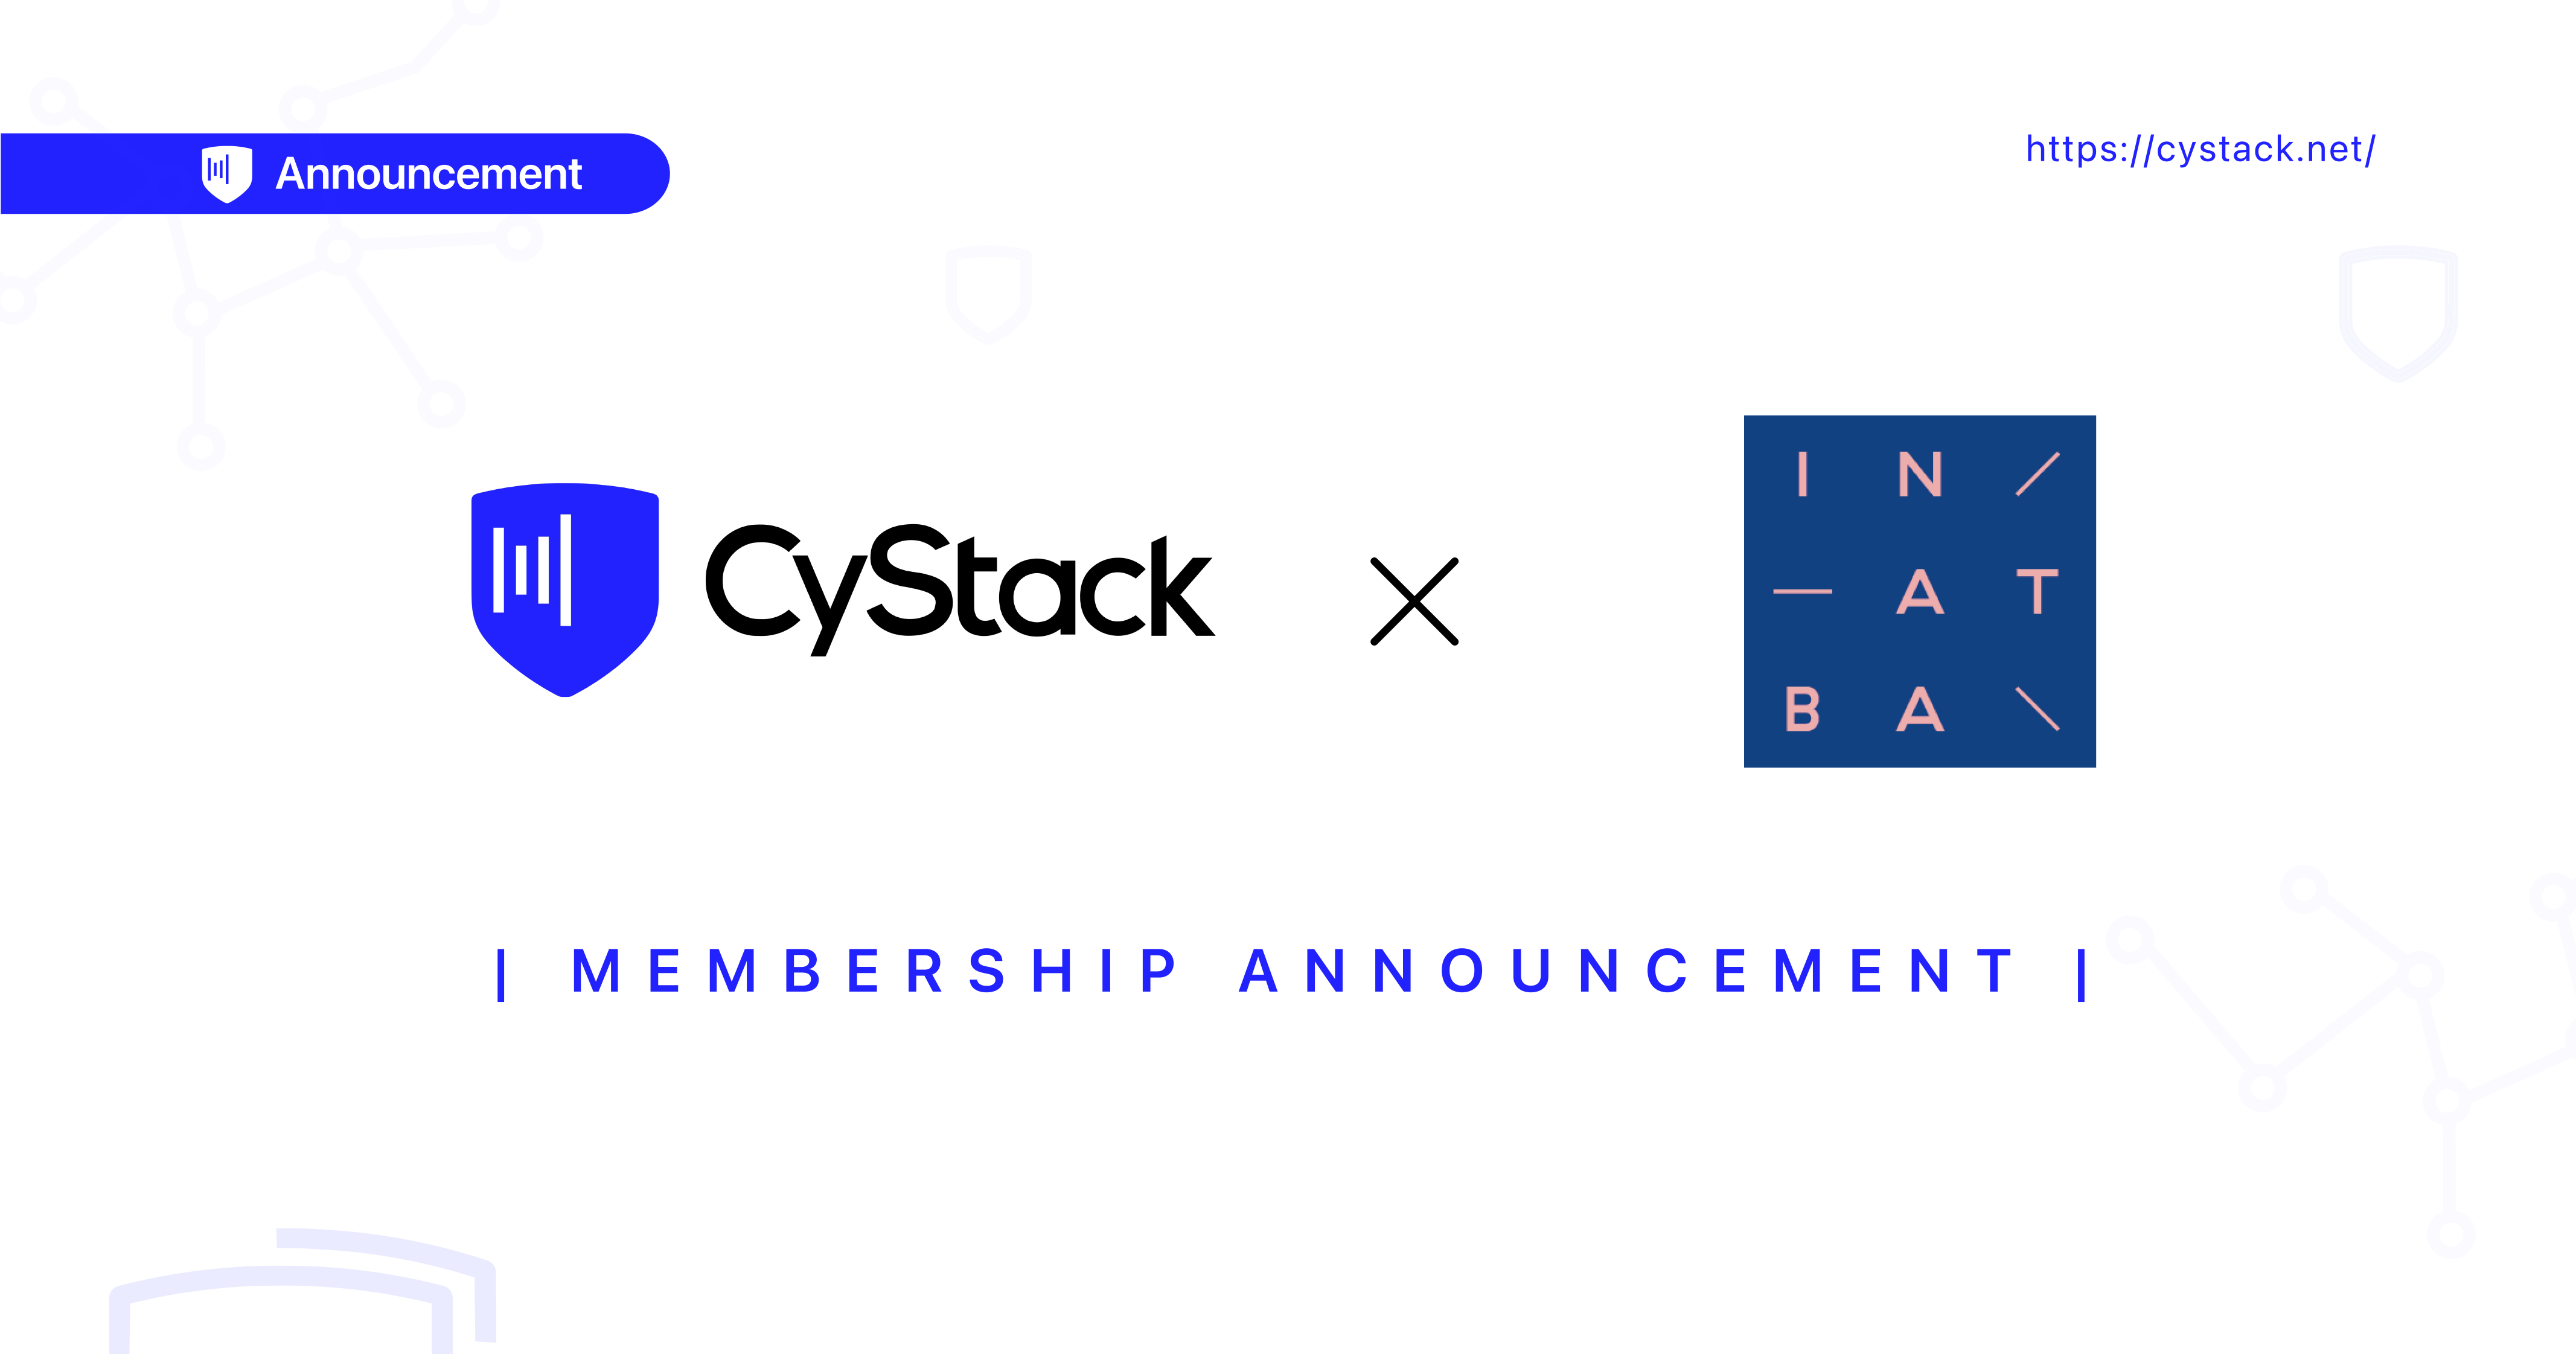 CyStack Becomes An Official Member Of The International Association For Trusted Blockchain Applications (INATBA)